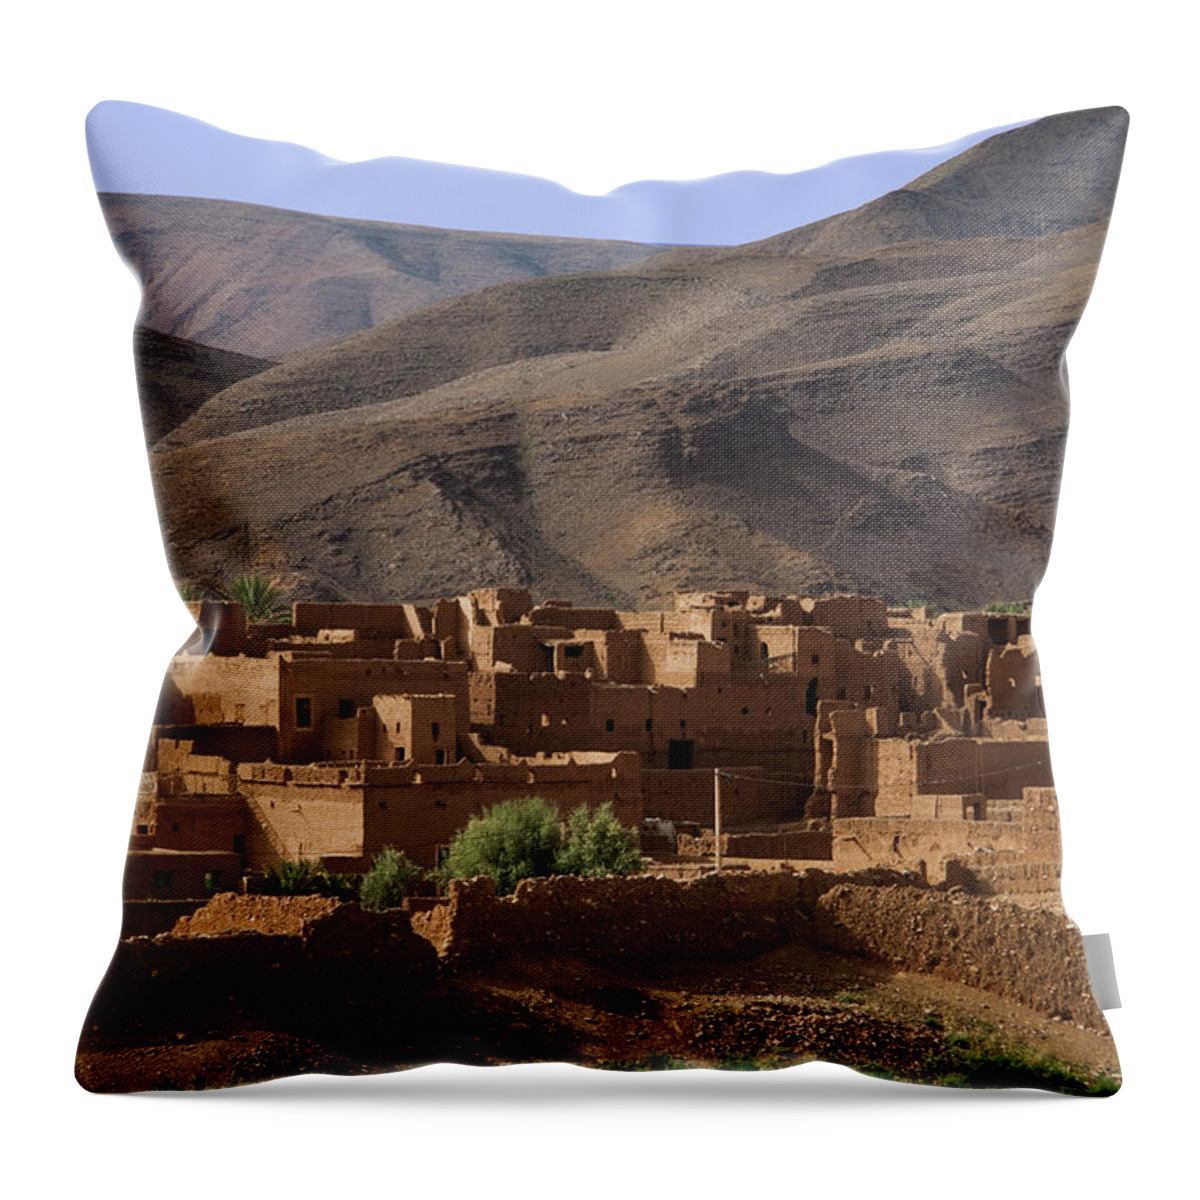 Built Structure Throw Pillow featuring the photograph Kasbah Morocco by Paul Boyden - Polimo